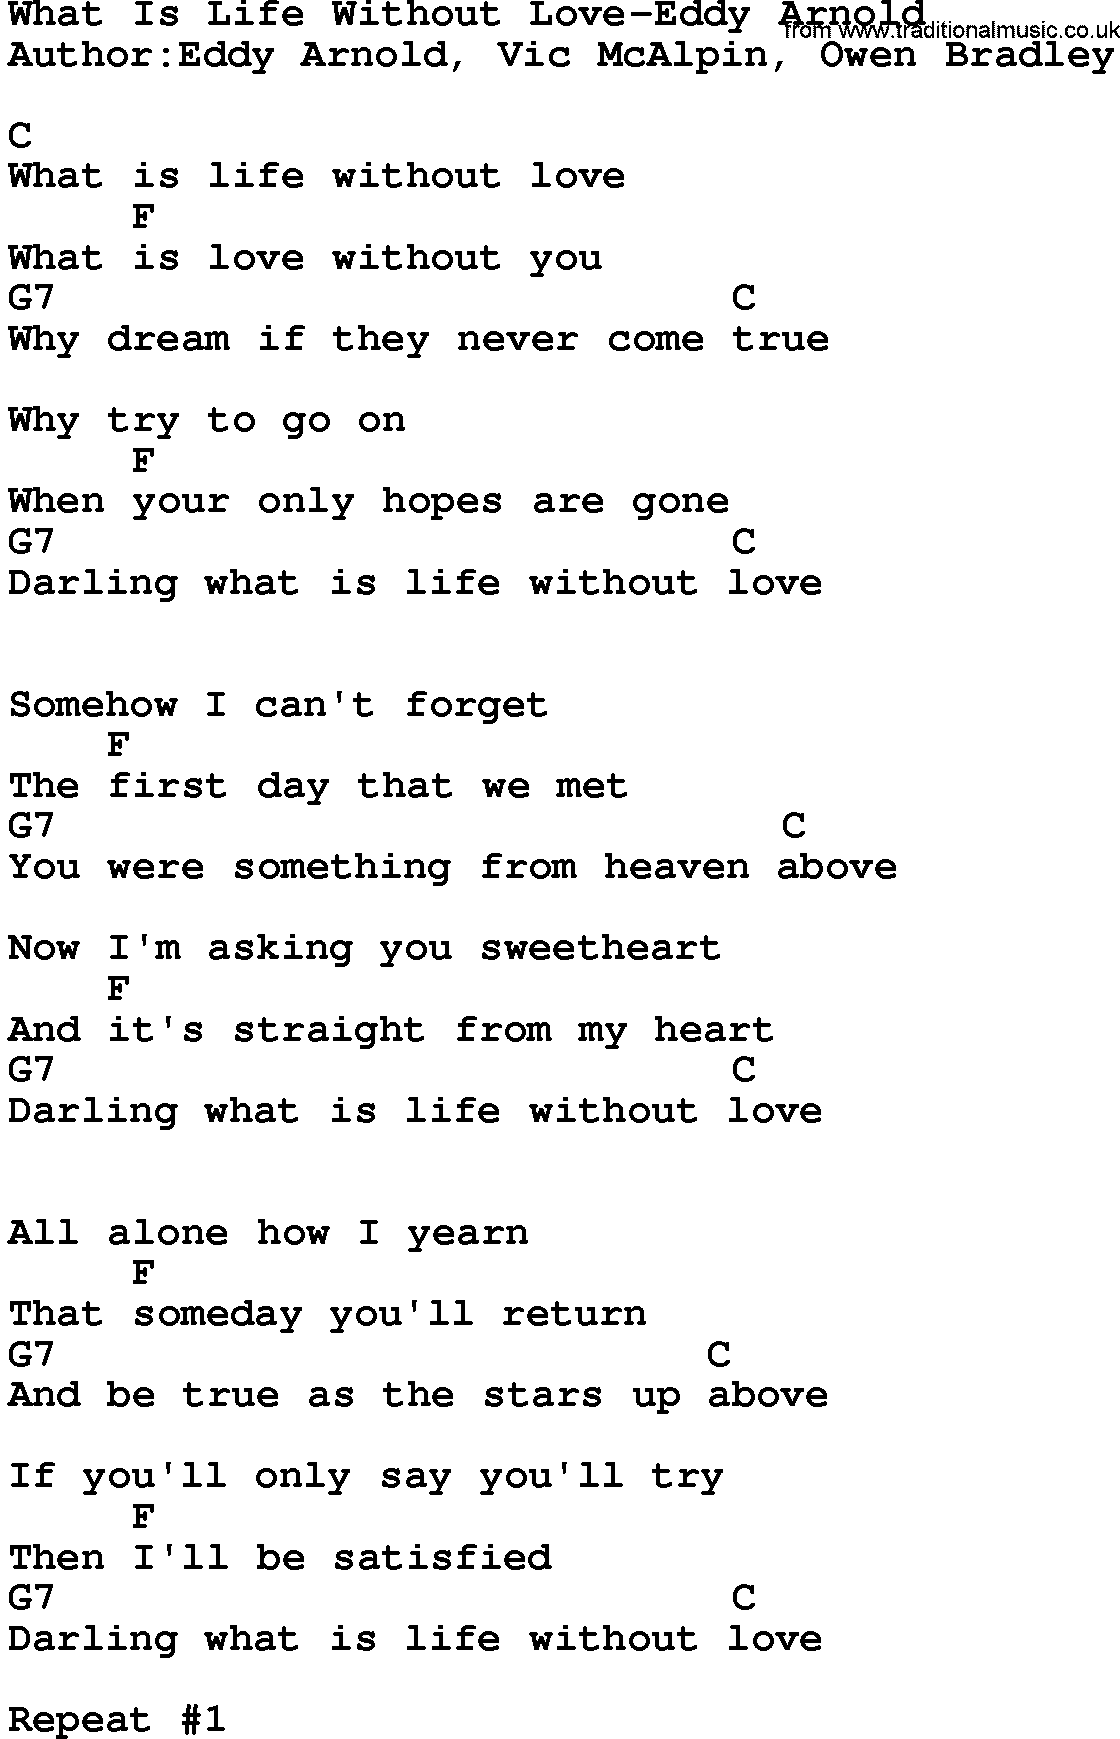 Country music song: What Is Life Without Love-Eddy Arnold lyrics and chords